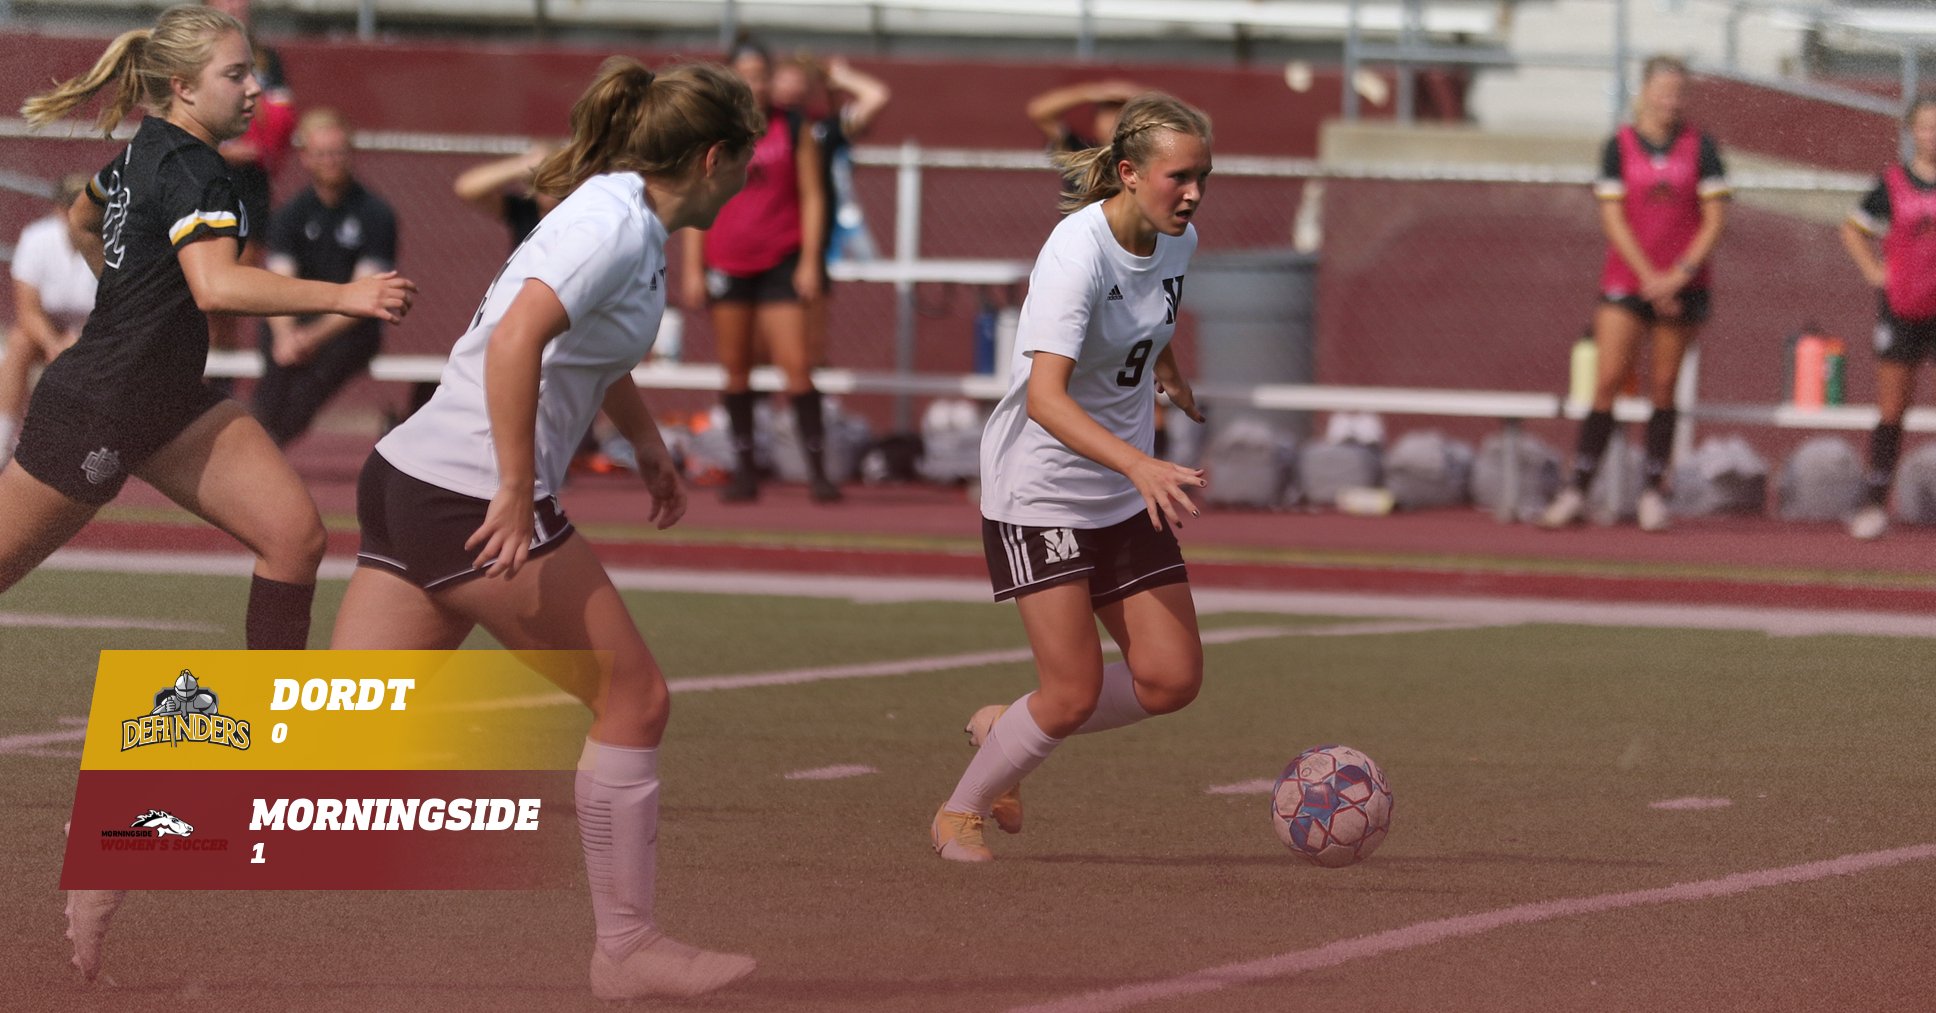 Second-half goal buoys Morningside in close-knit match-up